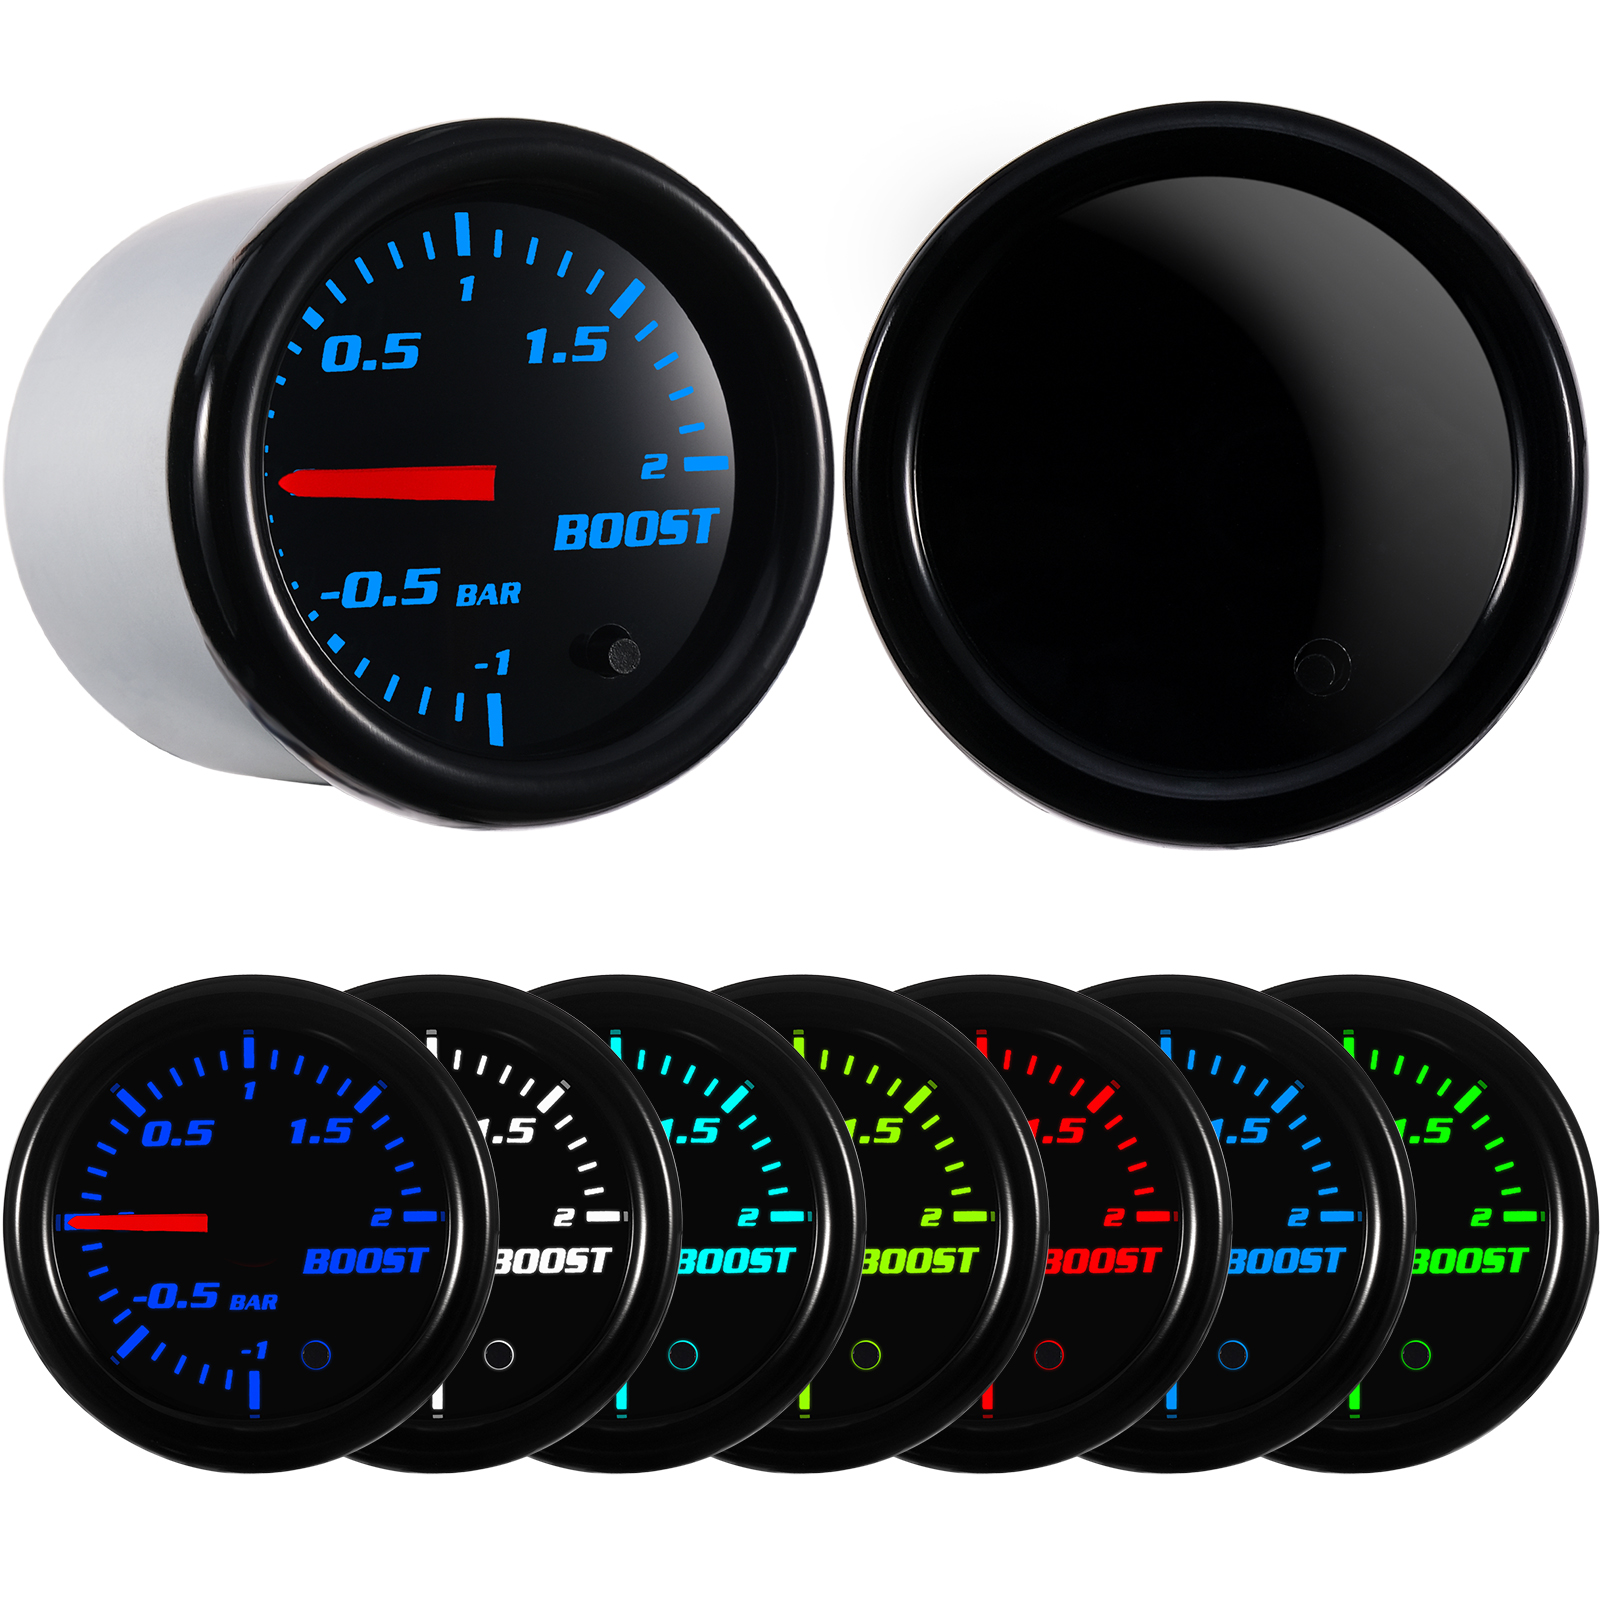 Tinted 7 Colour Turbo Gauge.